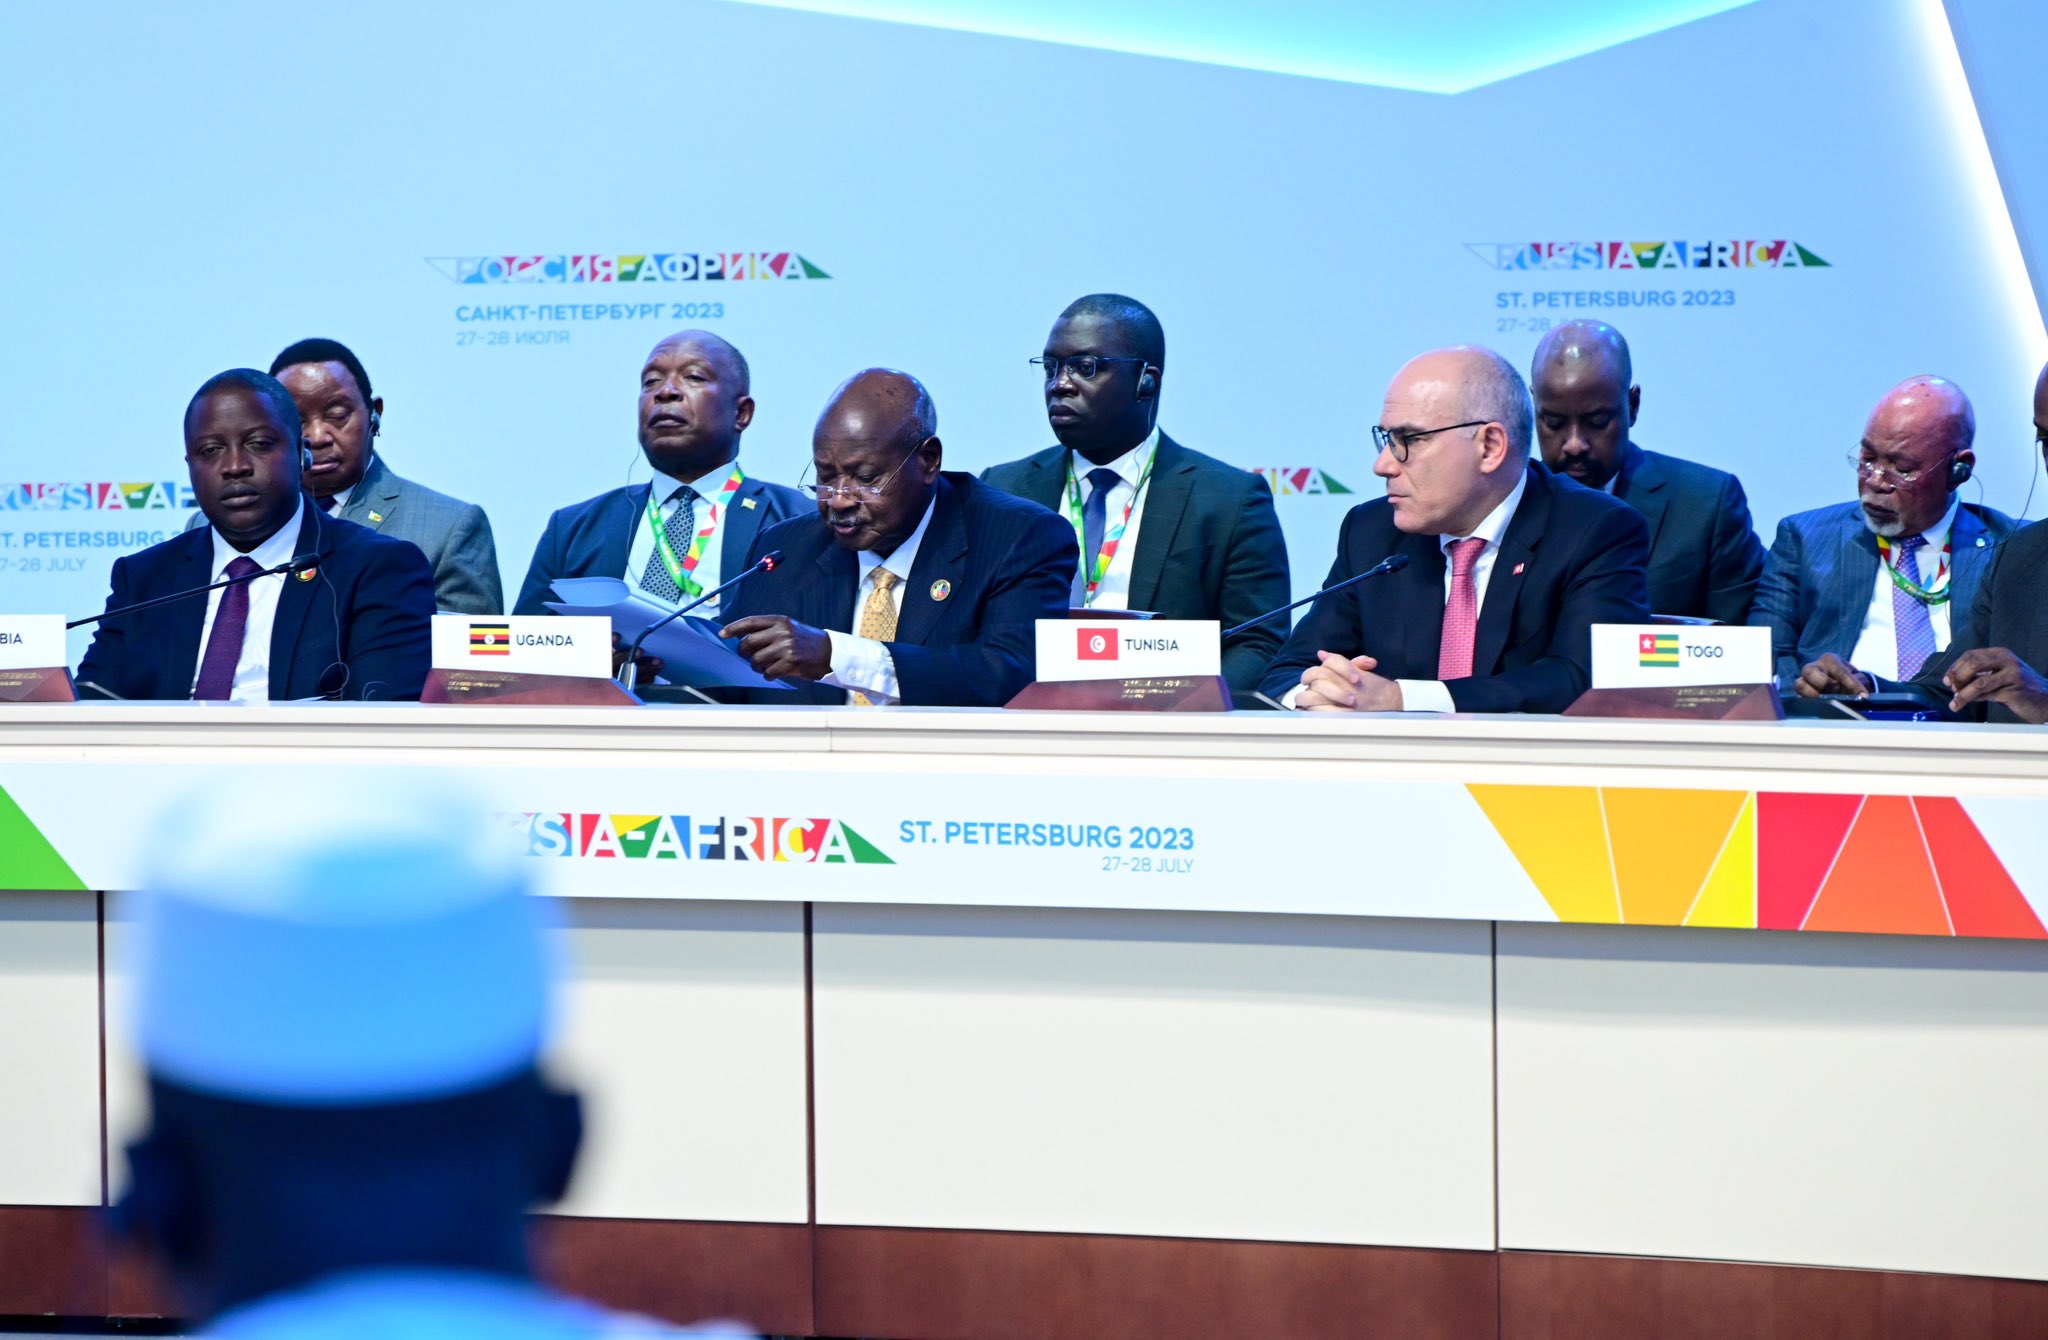 Stop fermenting opportunistic wars, coups, Museveni tells world at Russia-Africa summit